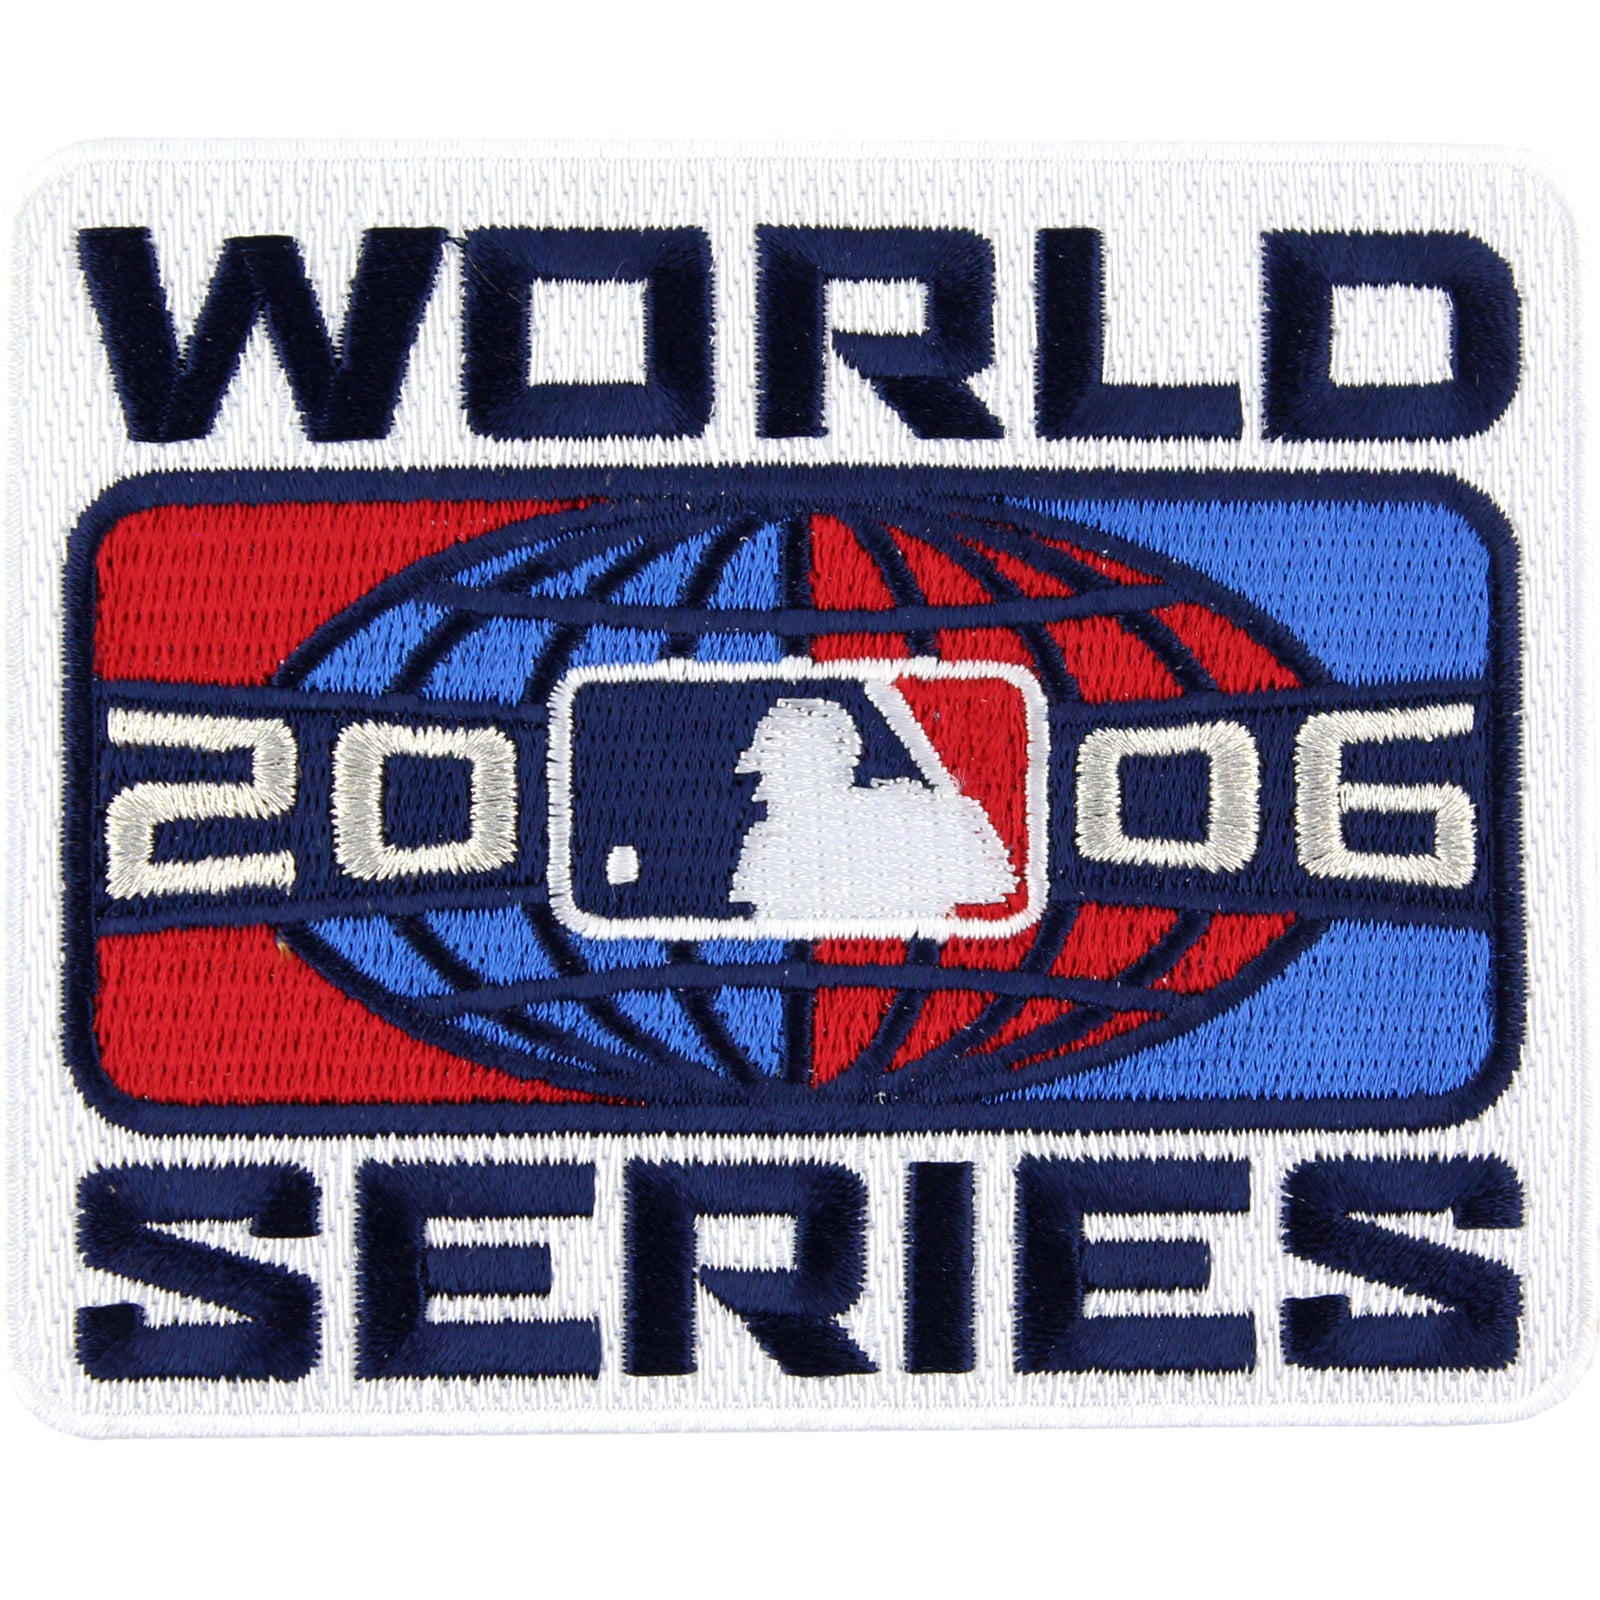 2006 MLB World Series Logo Jersey Patch St. Louis Cardinals vs. Detroit Tigers by Patch Collection